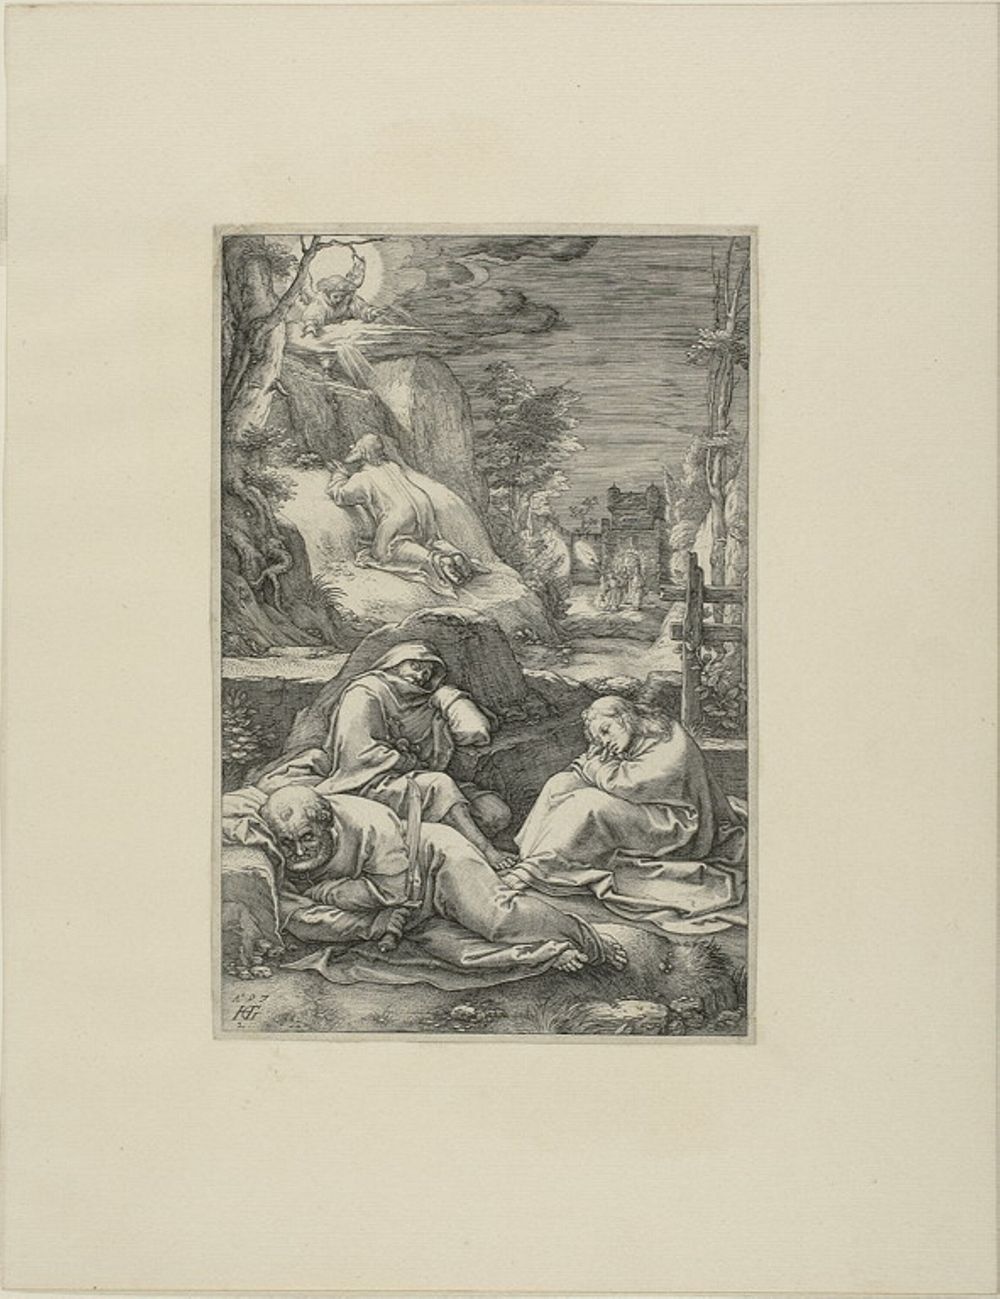 The Agony in the Garden, plate two from The Passion of Christ by Hendrick Goltzius